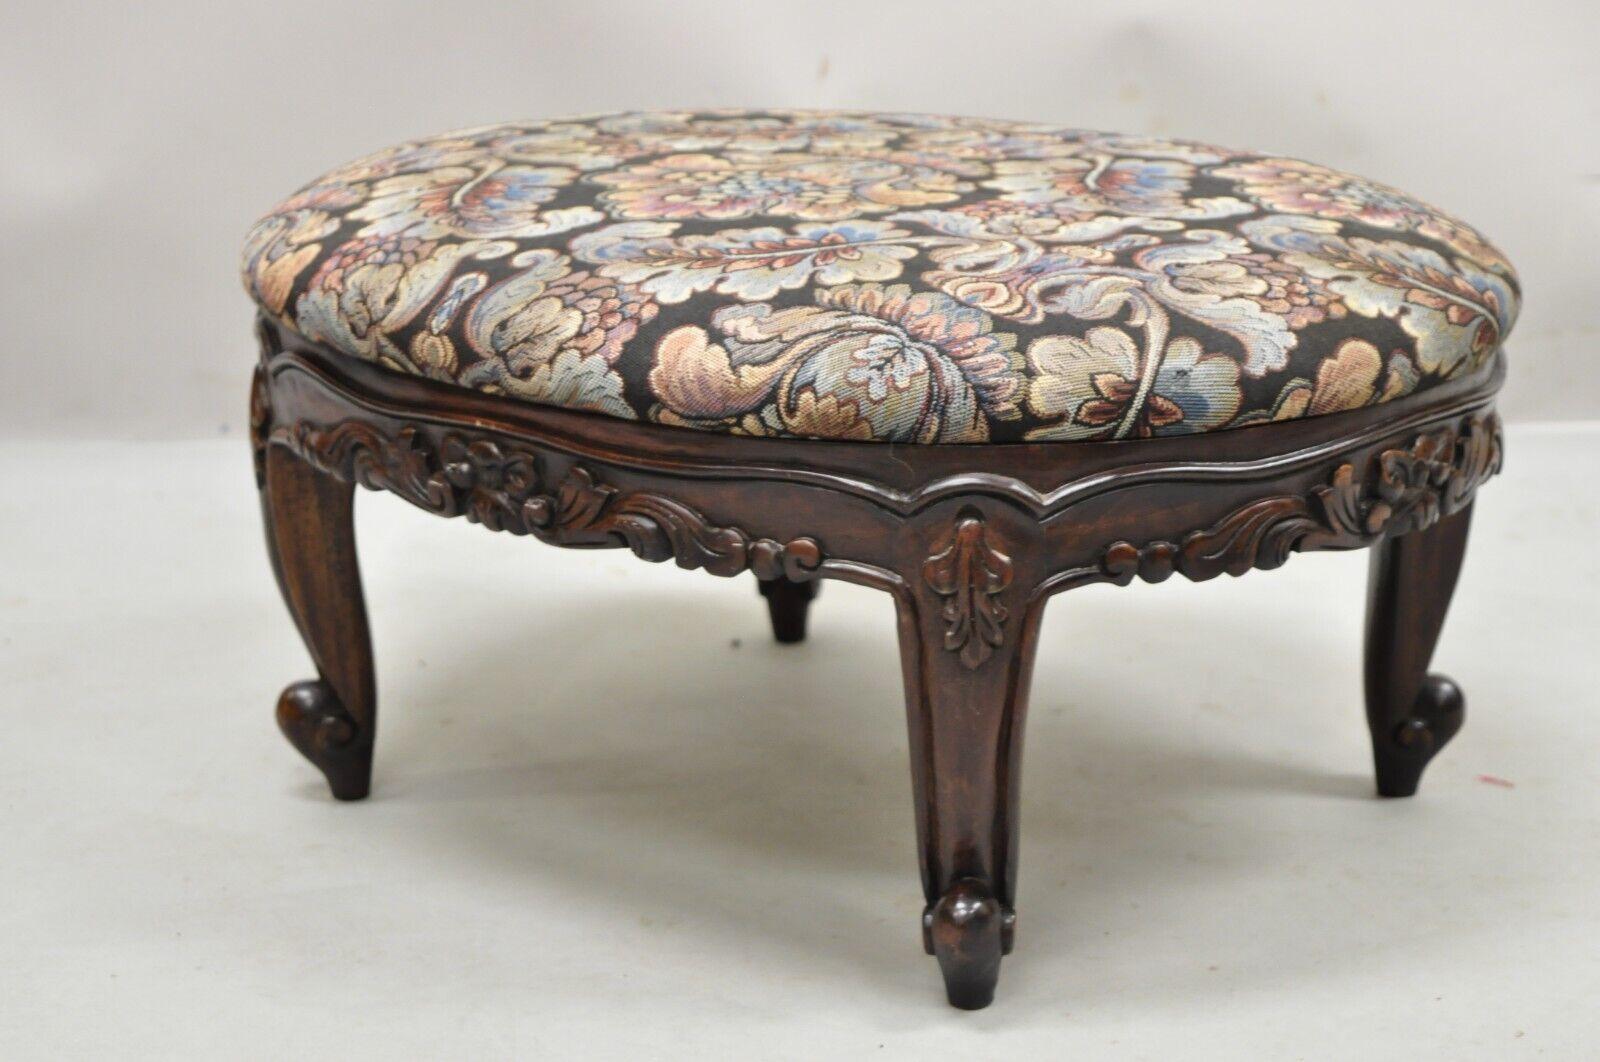 French Louis XV Victorian style carved wood 22 inch oval small Footstool ottoman. Item features a solid wood frame, beautiful wood grain, clean modernist lines, quality American craftmanship. Circa late 20th - Early 21st century. Measurements: 10